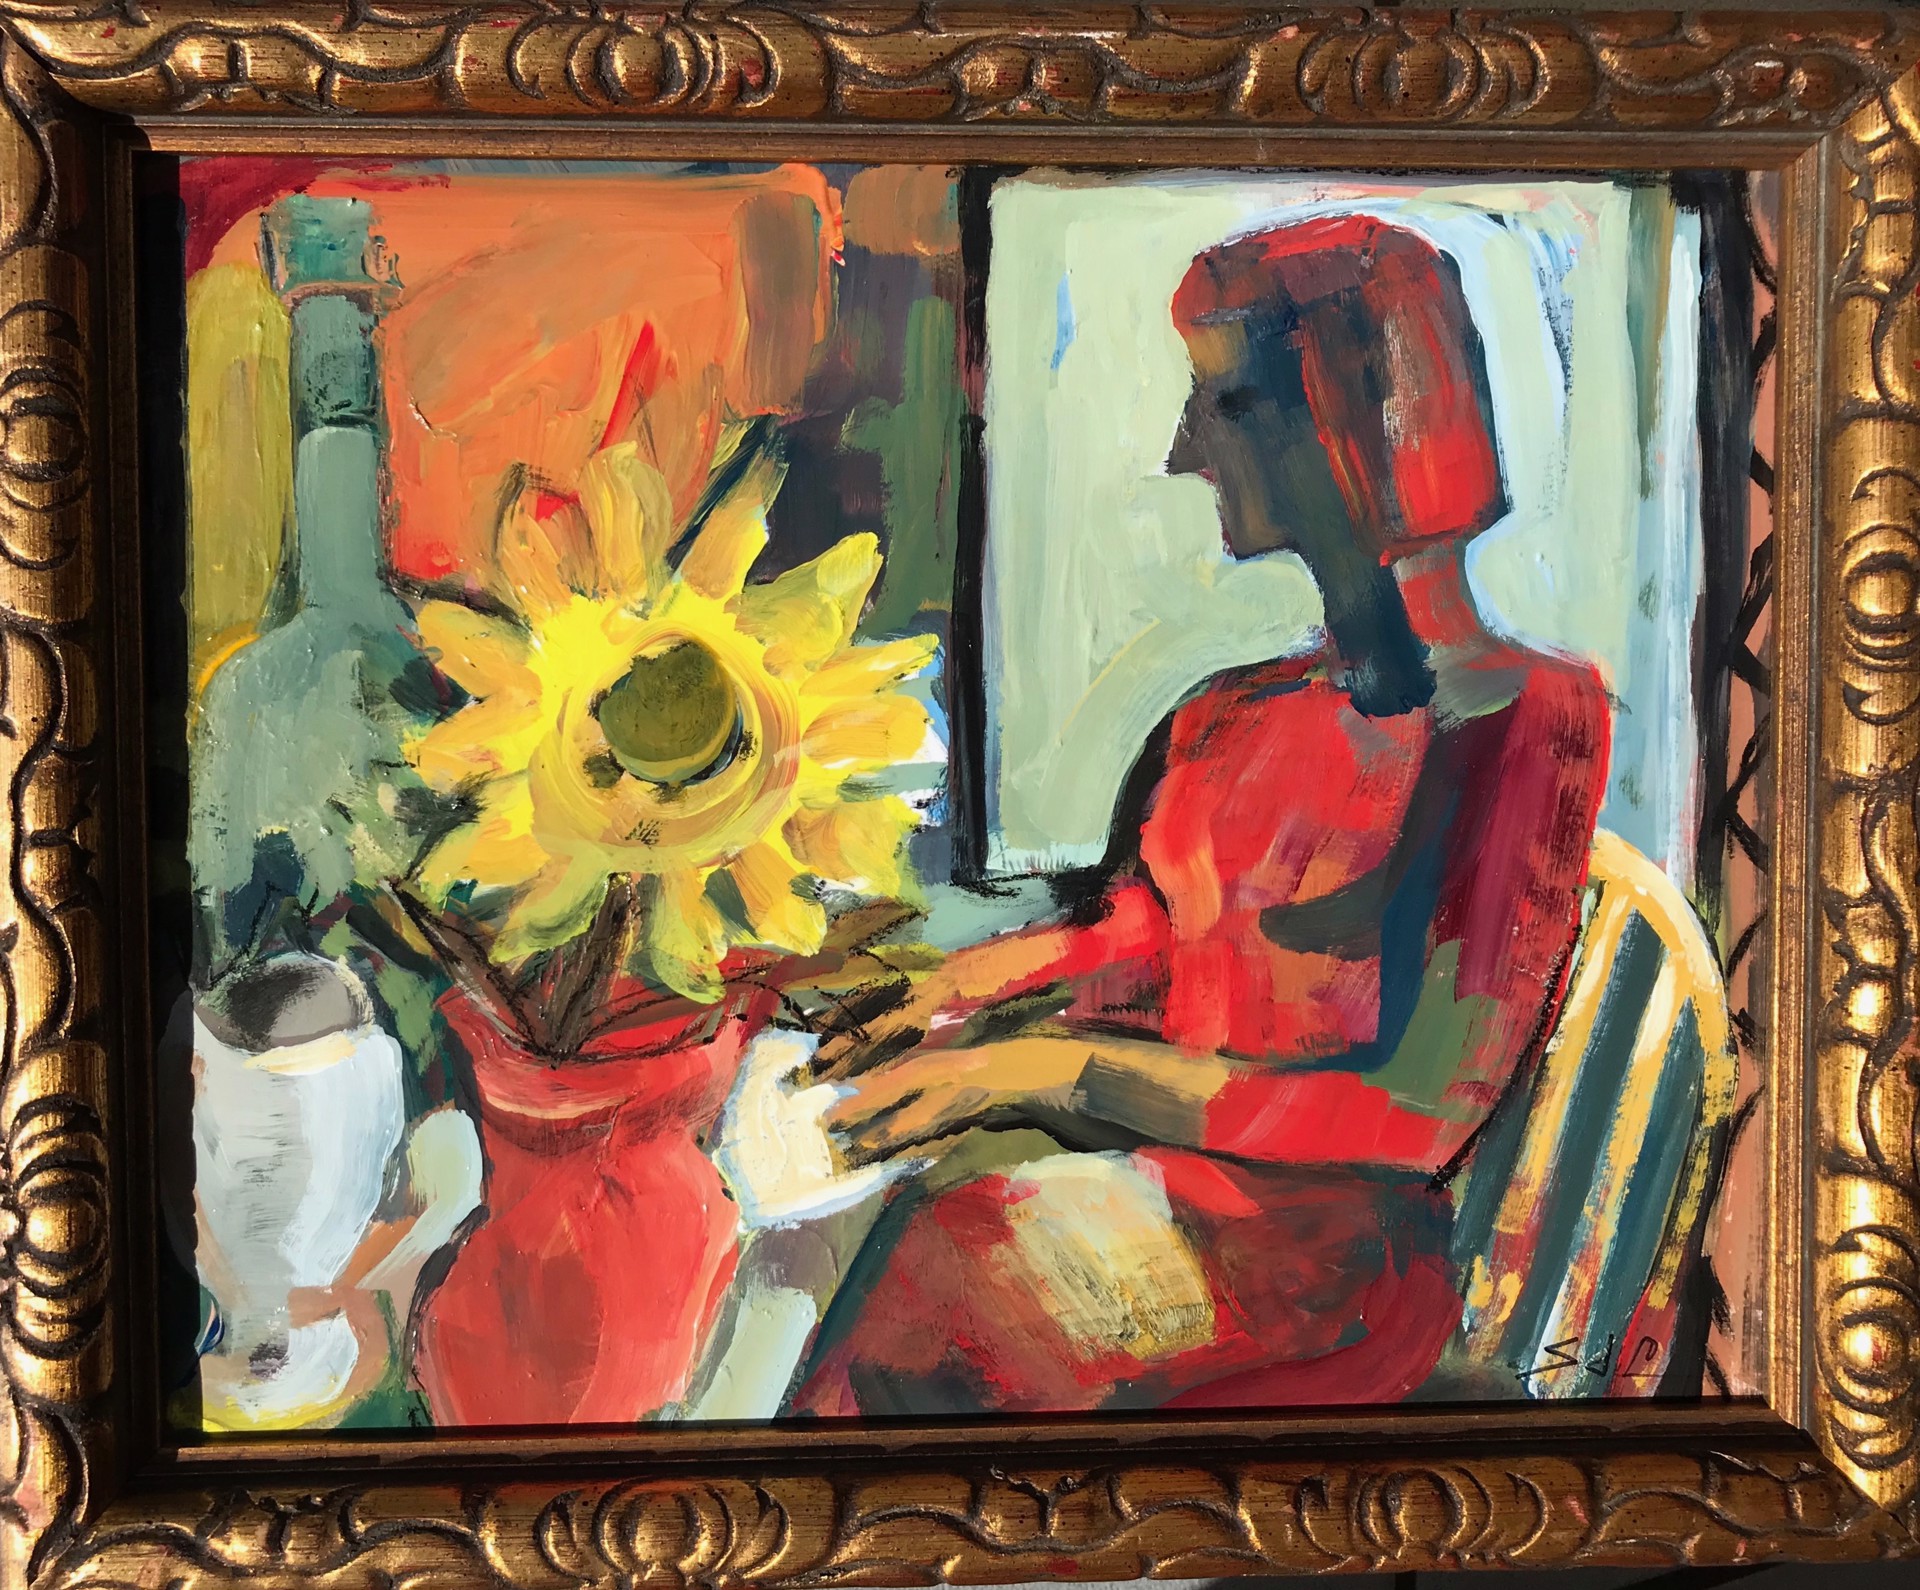 Woman With Sunflowers and Envelope by Sandra J. Campbell